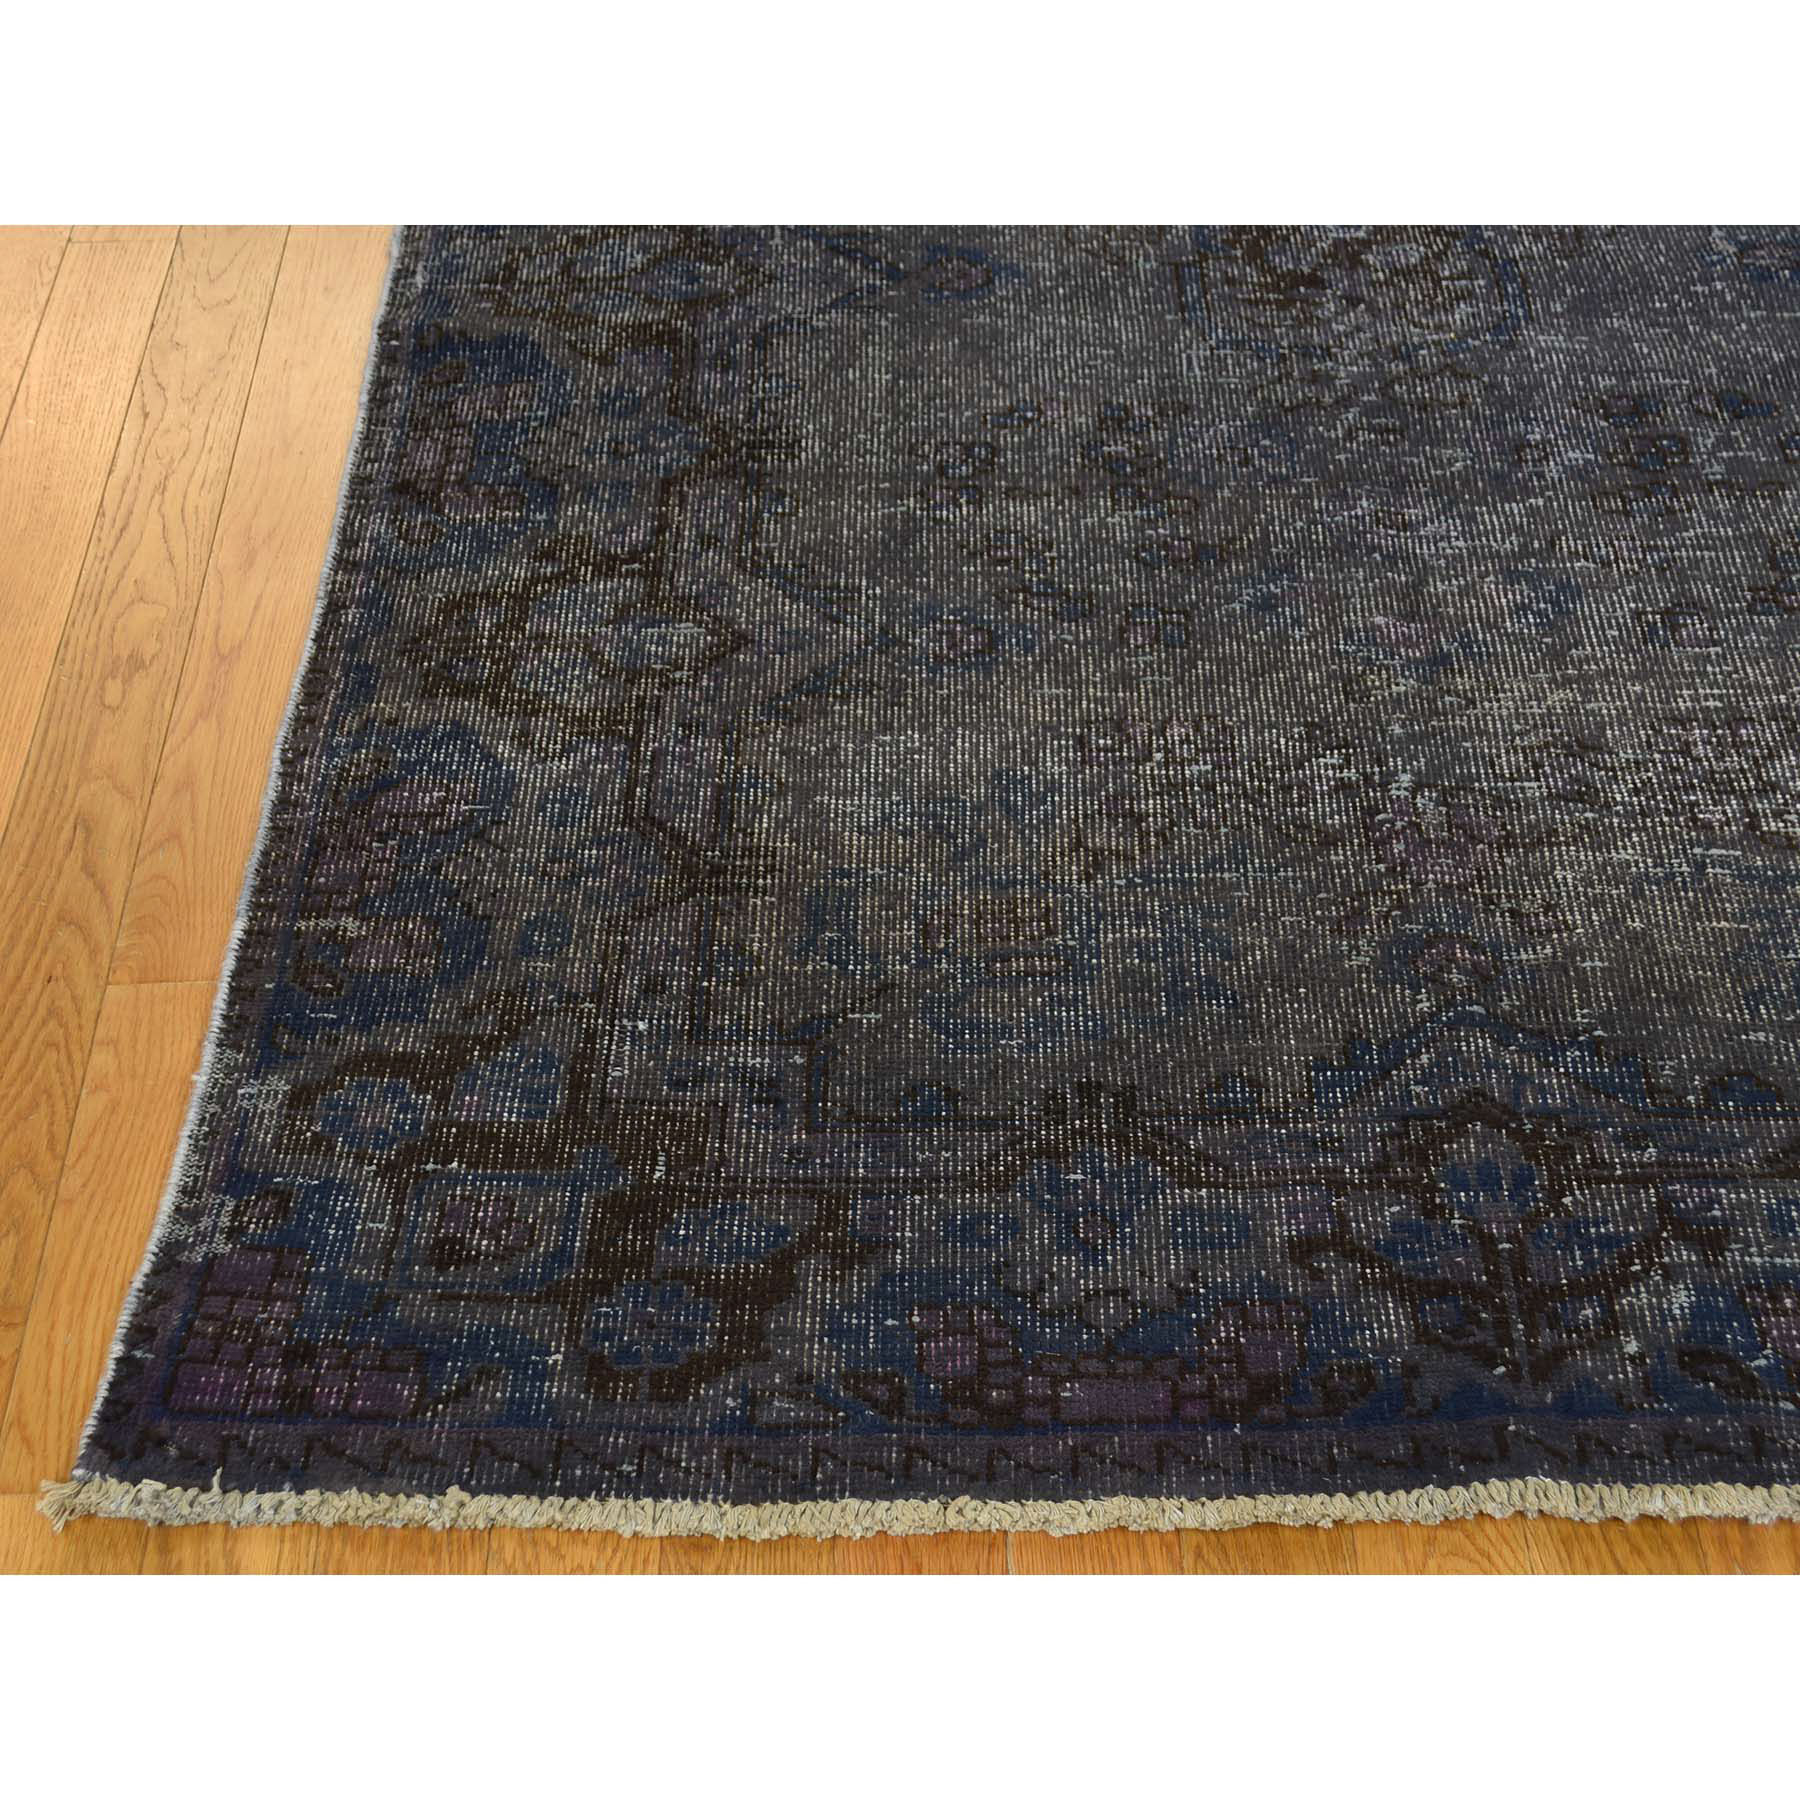 4-10--x9-10-- Persian Overdyed Hamadan Worn Hand-Knotted Wide Runner Rug 